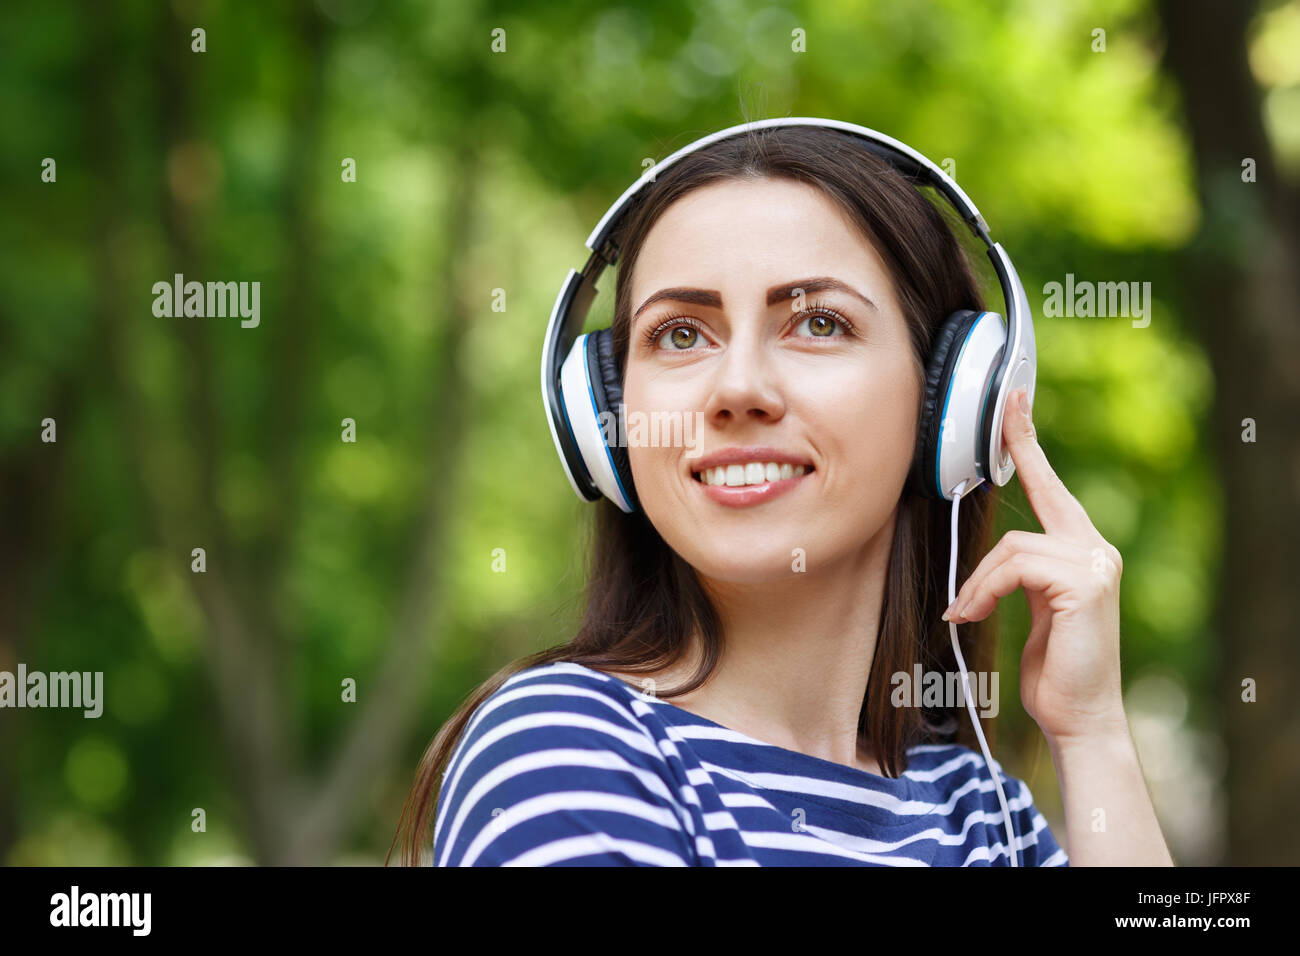 young happy smiling brunette woman with headphones outdoors on summer day. Girl listening music in headphones in park. Portrait of woman at outdoor wi Stock Photo